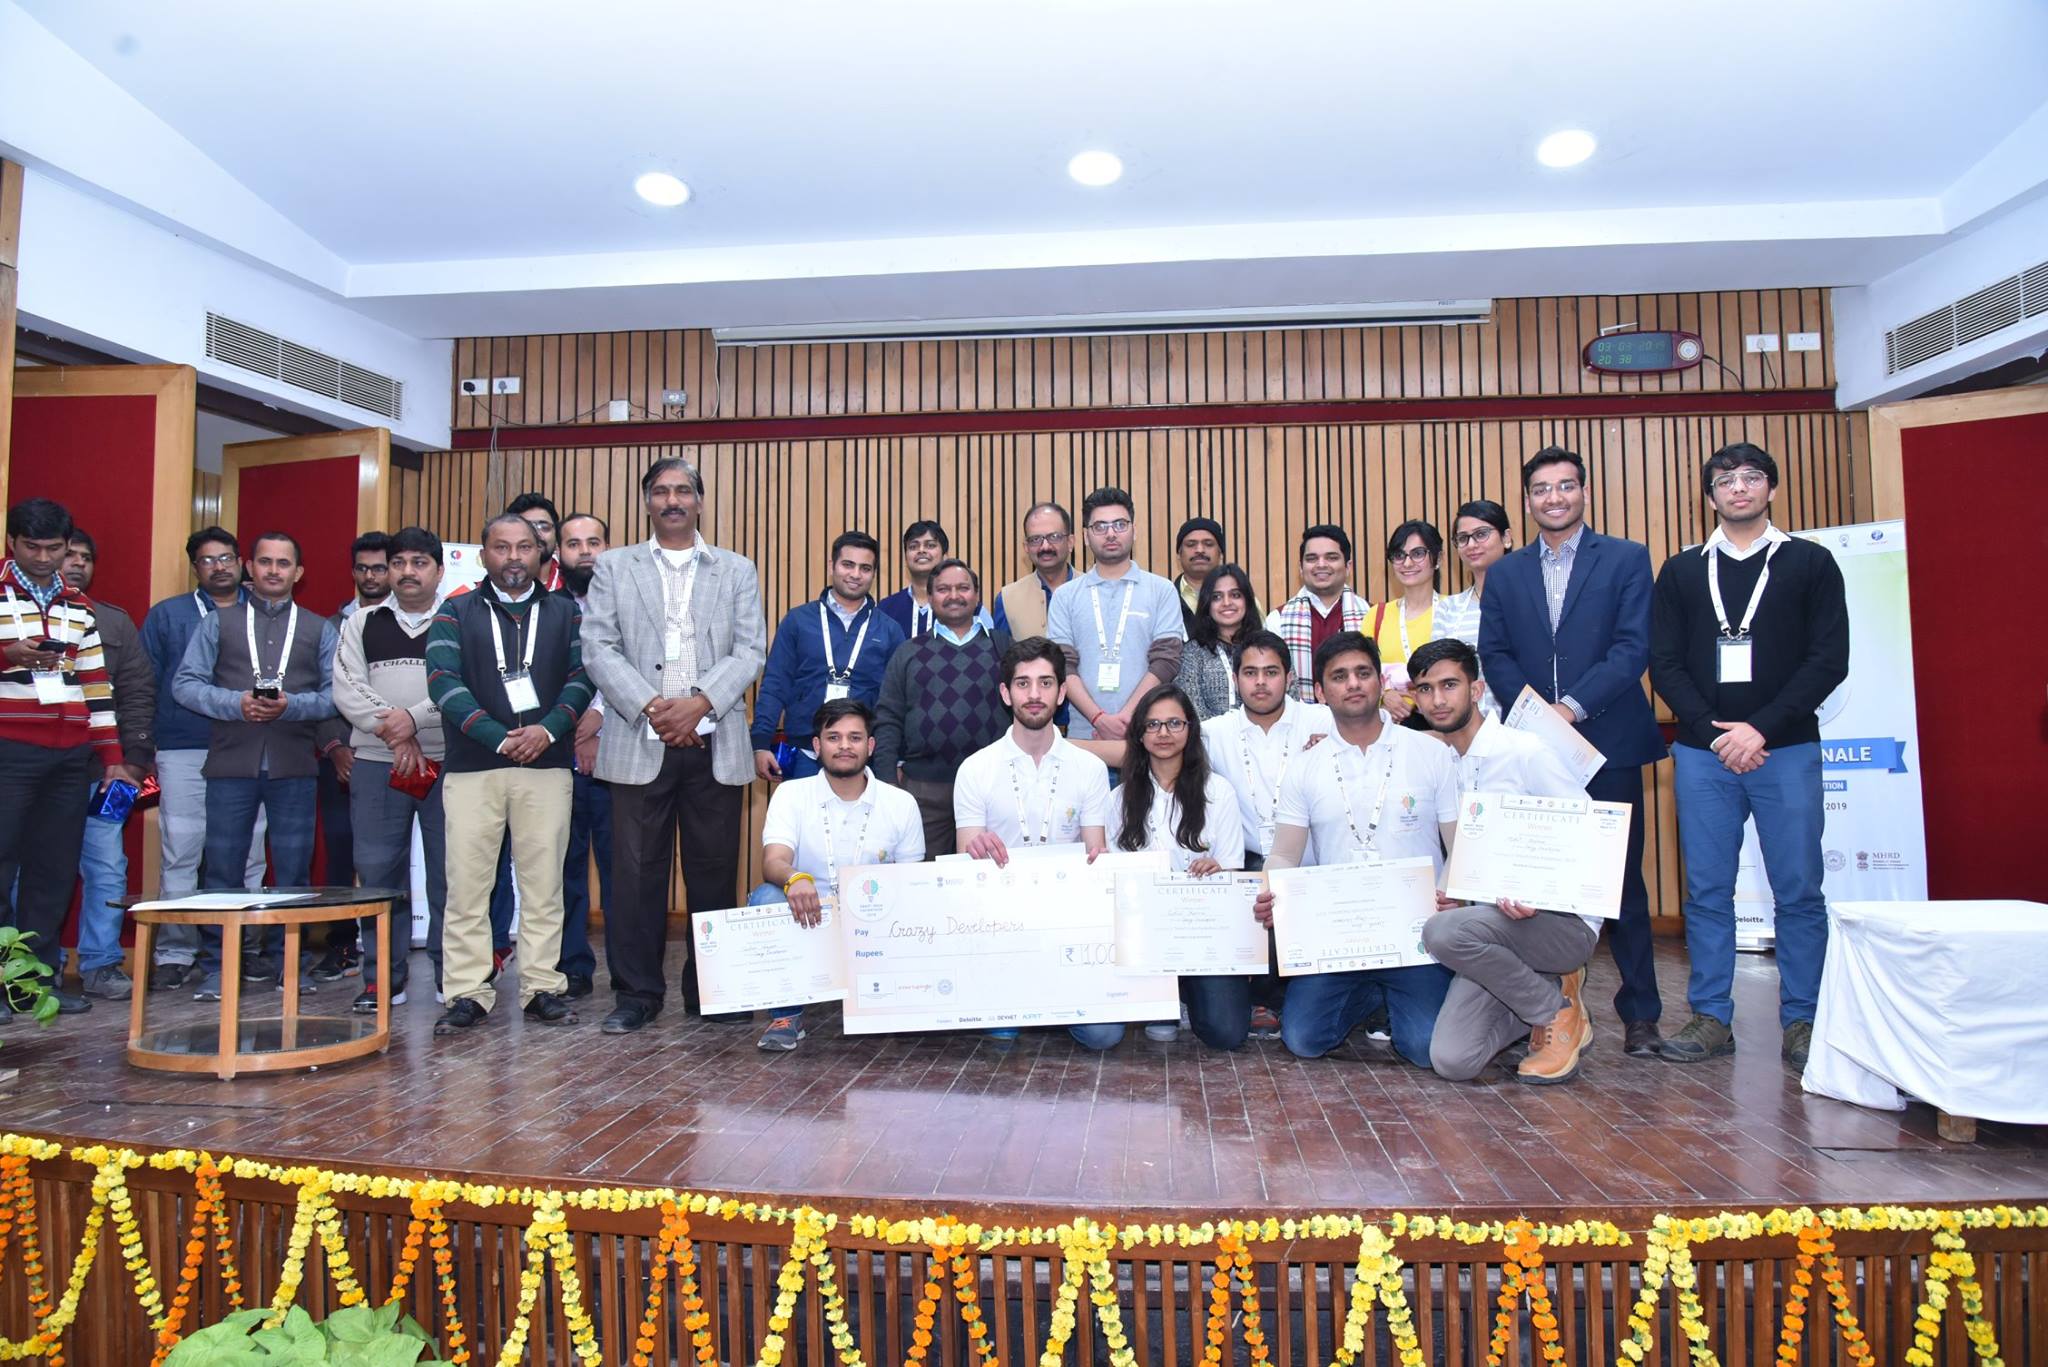 MIET students receiving their prize of Rs. 1 Lakh in SIH at IIT Kanpur